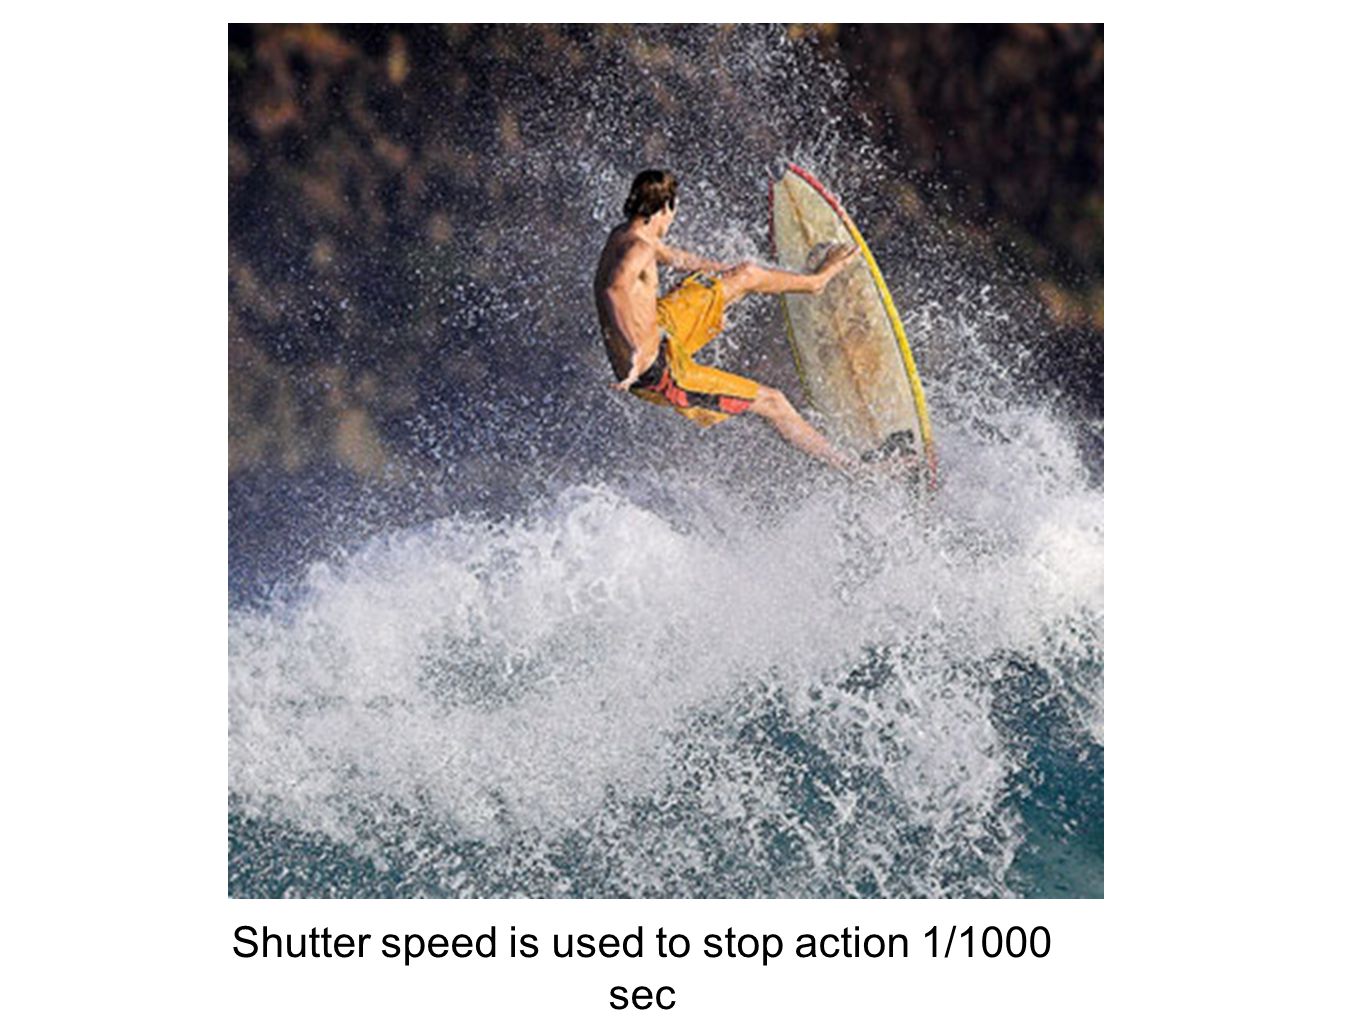 Shutter speed is used to stop action 1/1000 sec